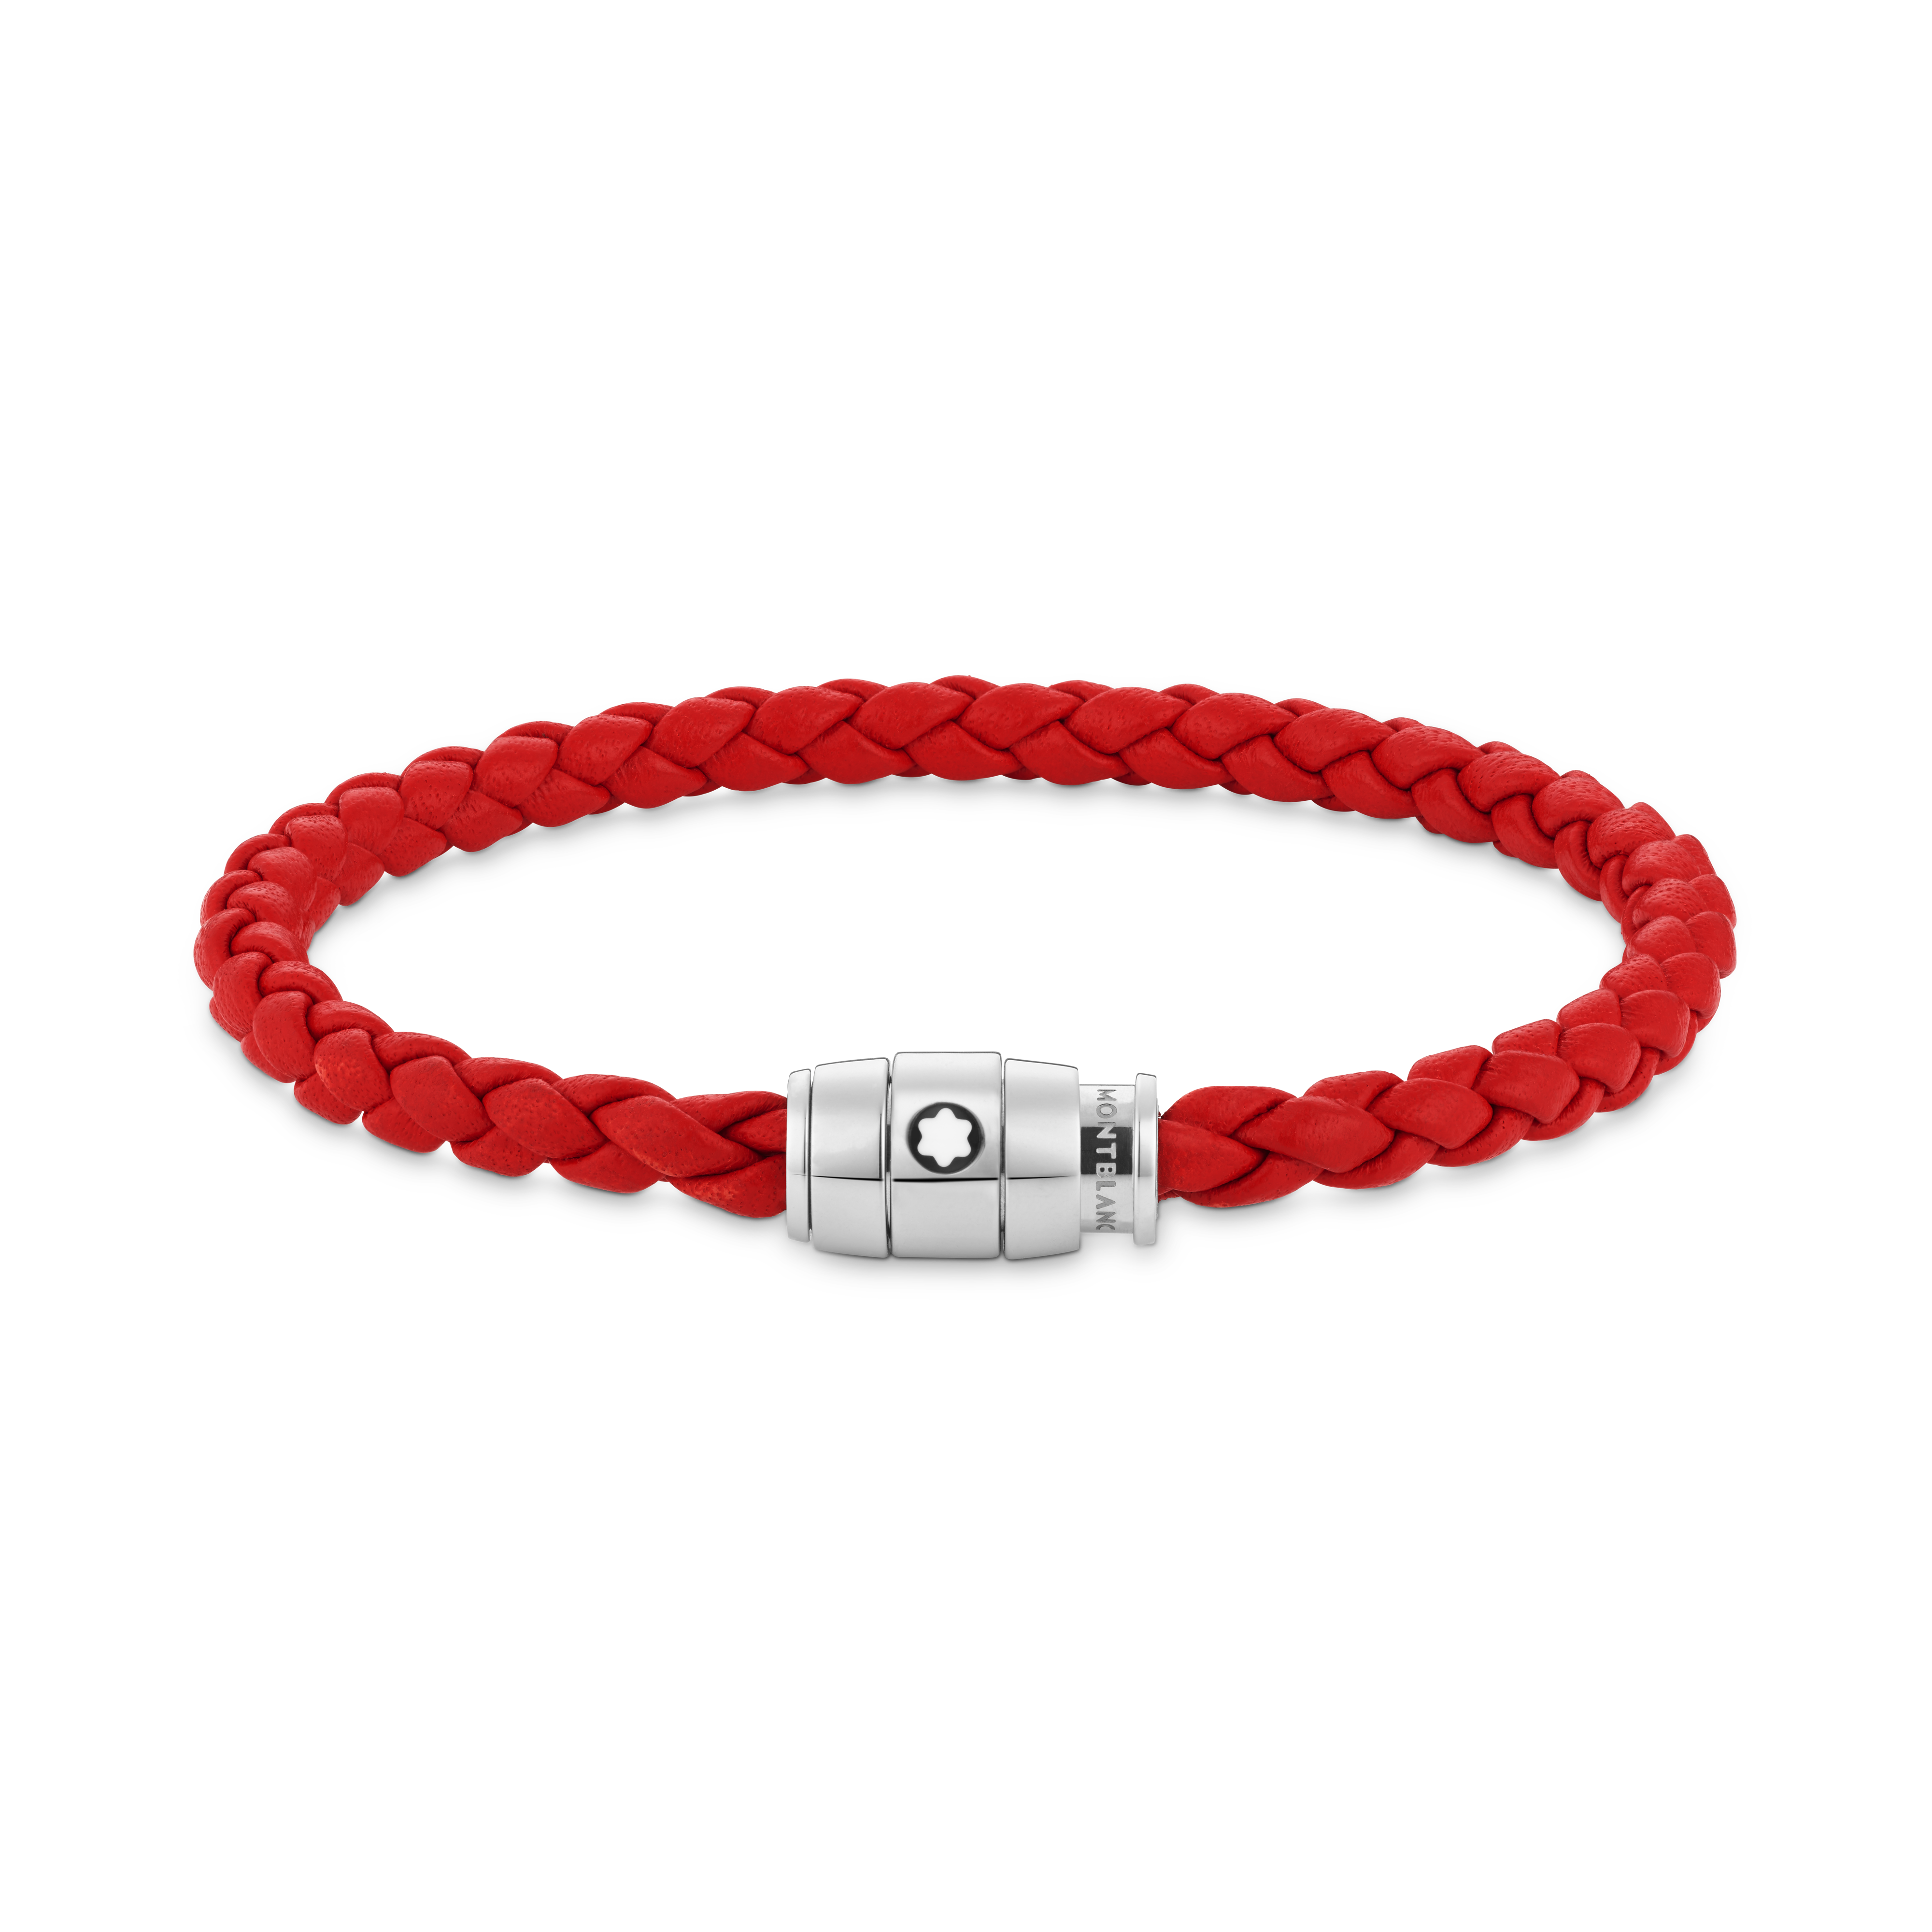 Bracelet Steel 3 rings closing and Red leather - SAR